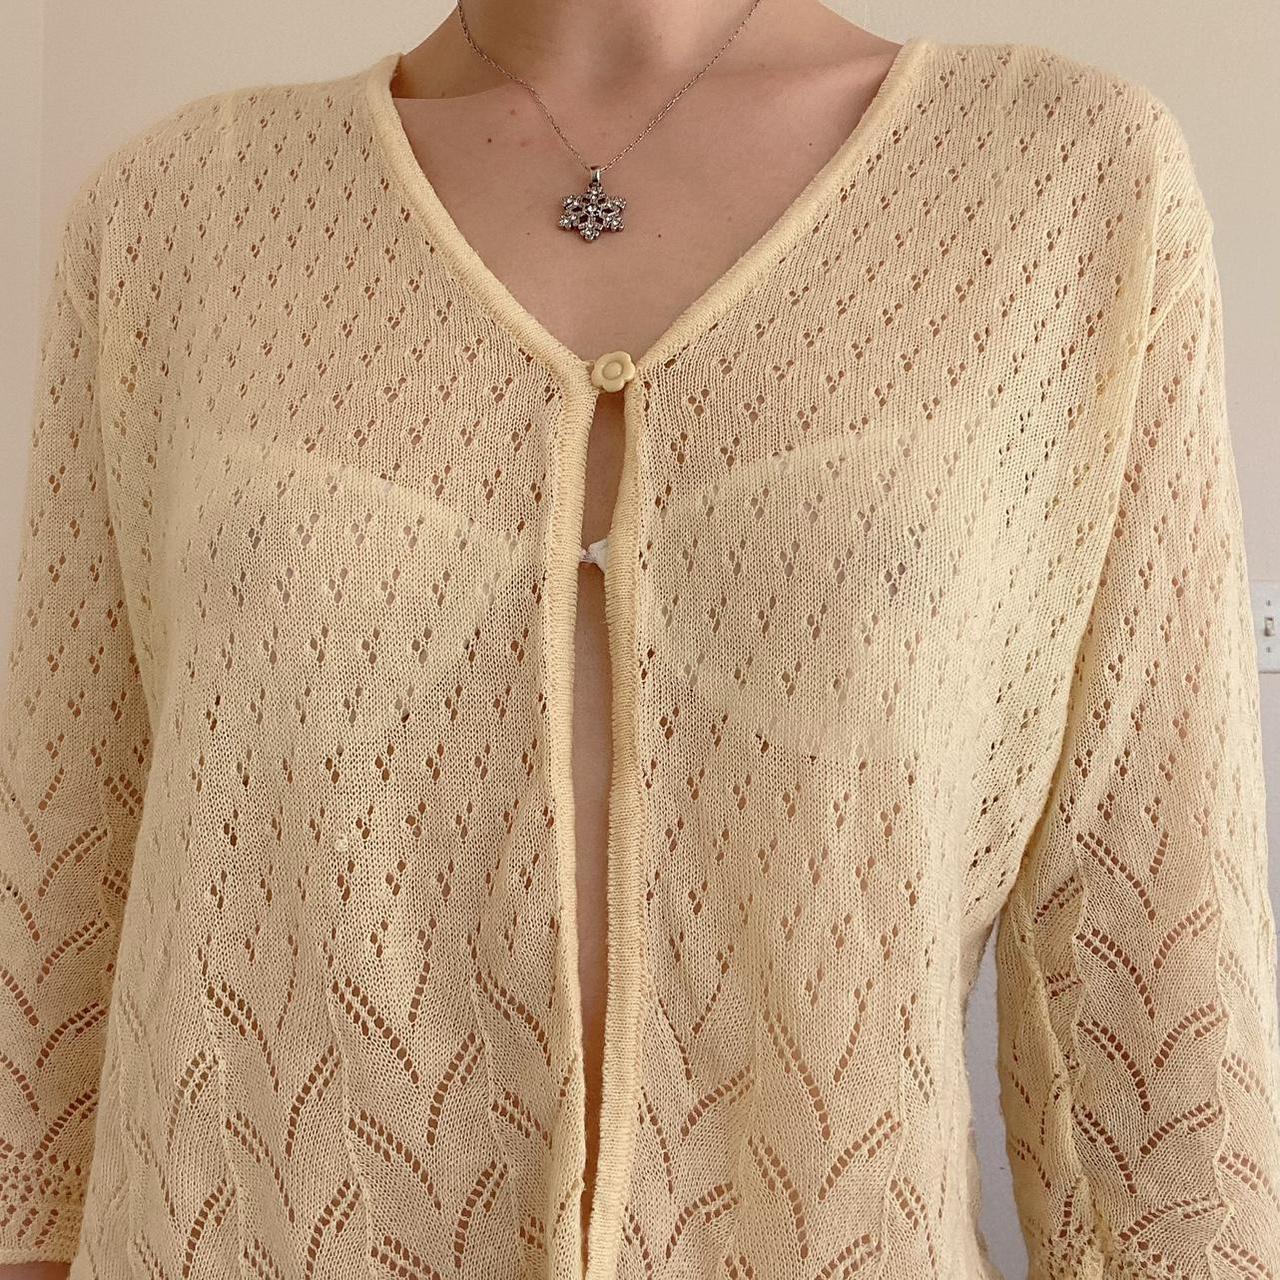 Product Image 2 - Cutest vintage pastel yellow knit